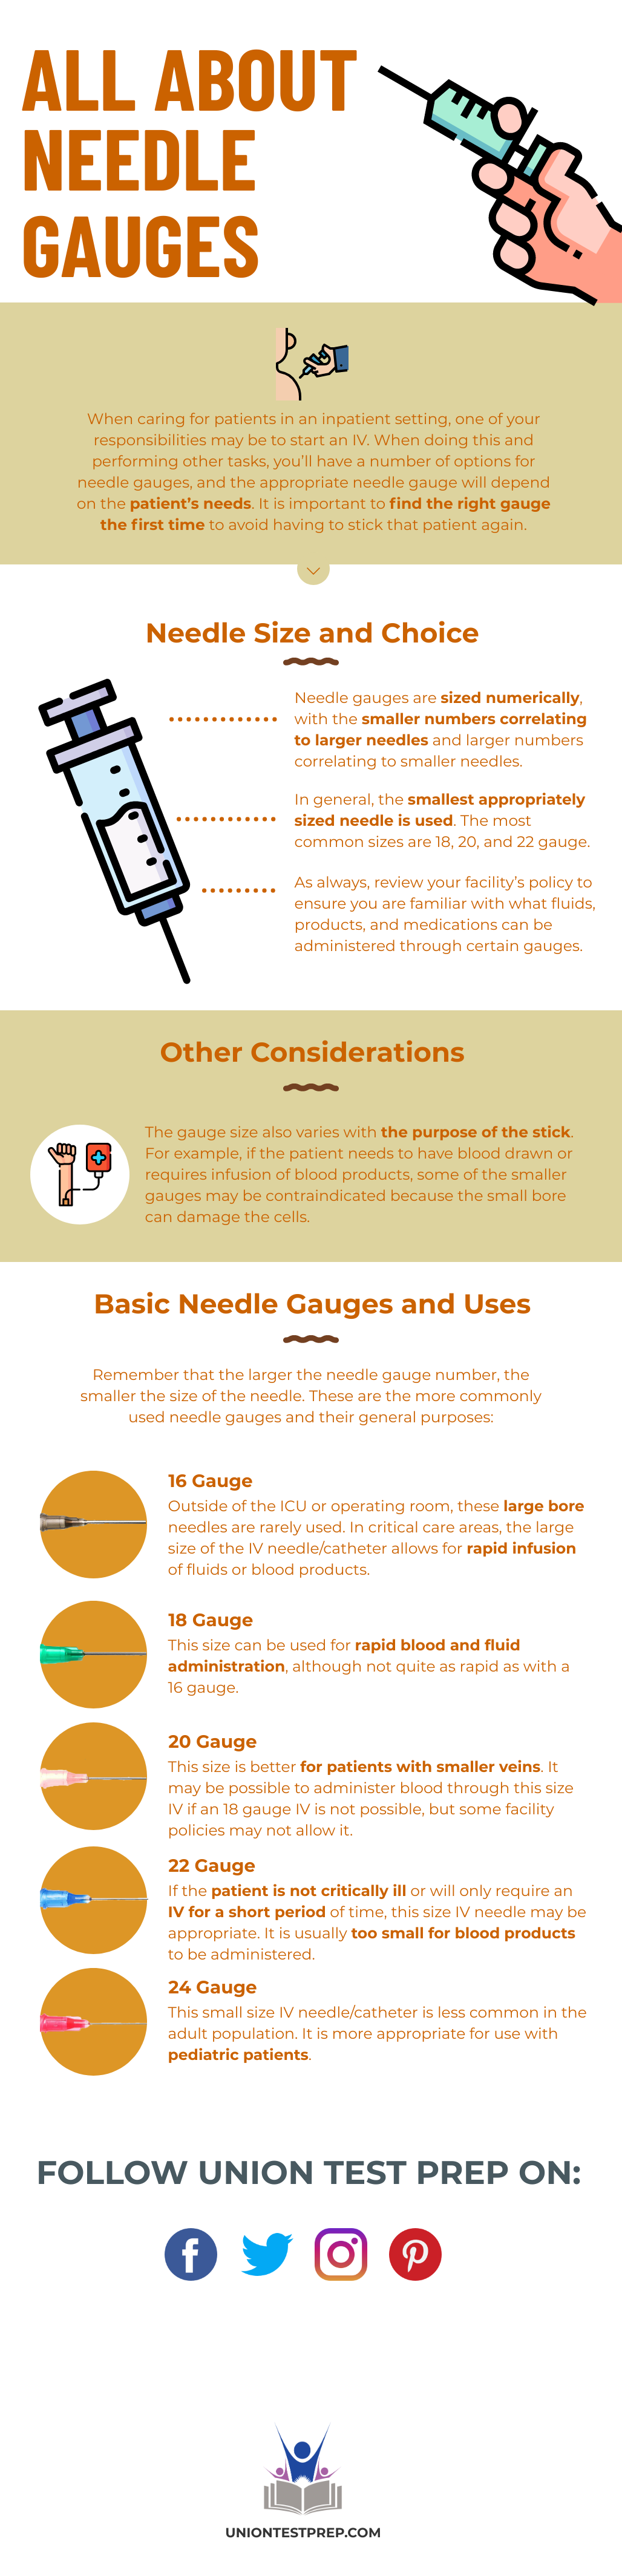 All About Needle Gauges